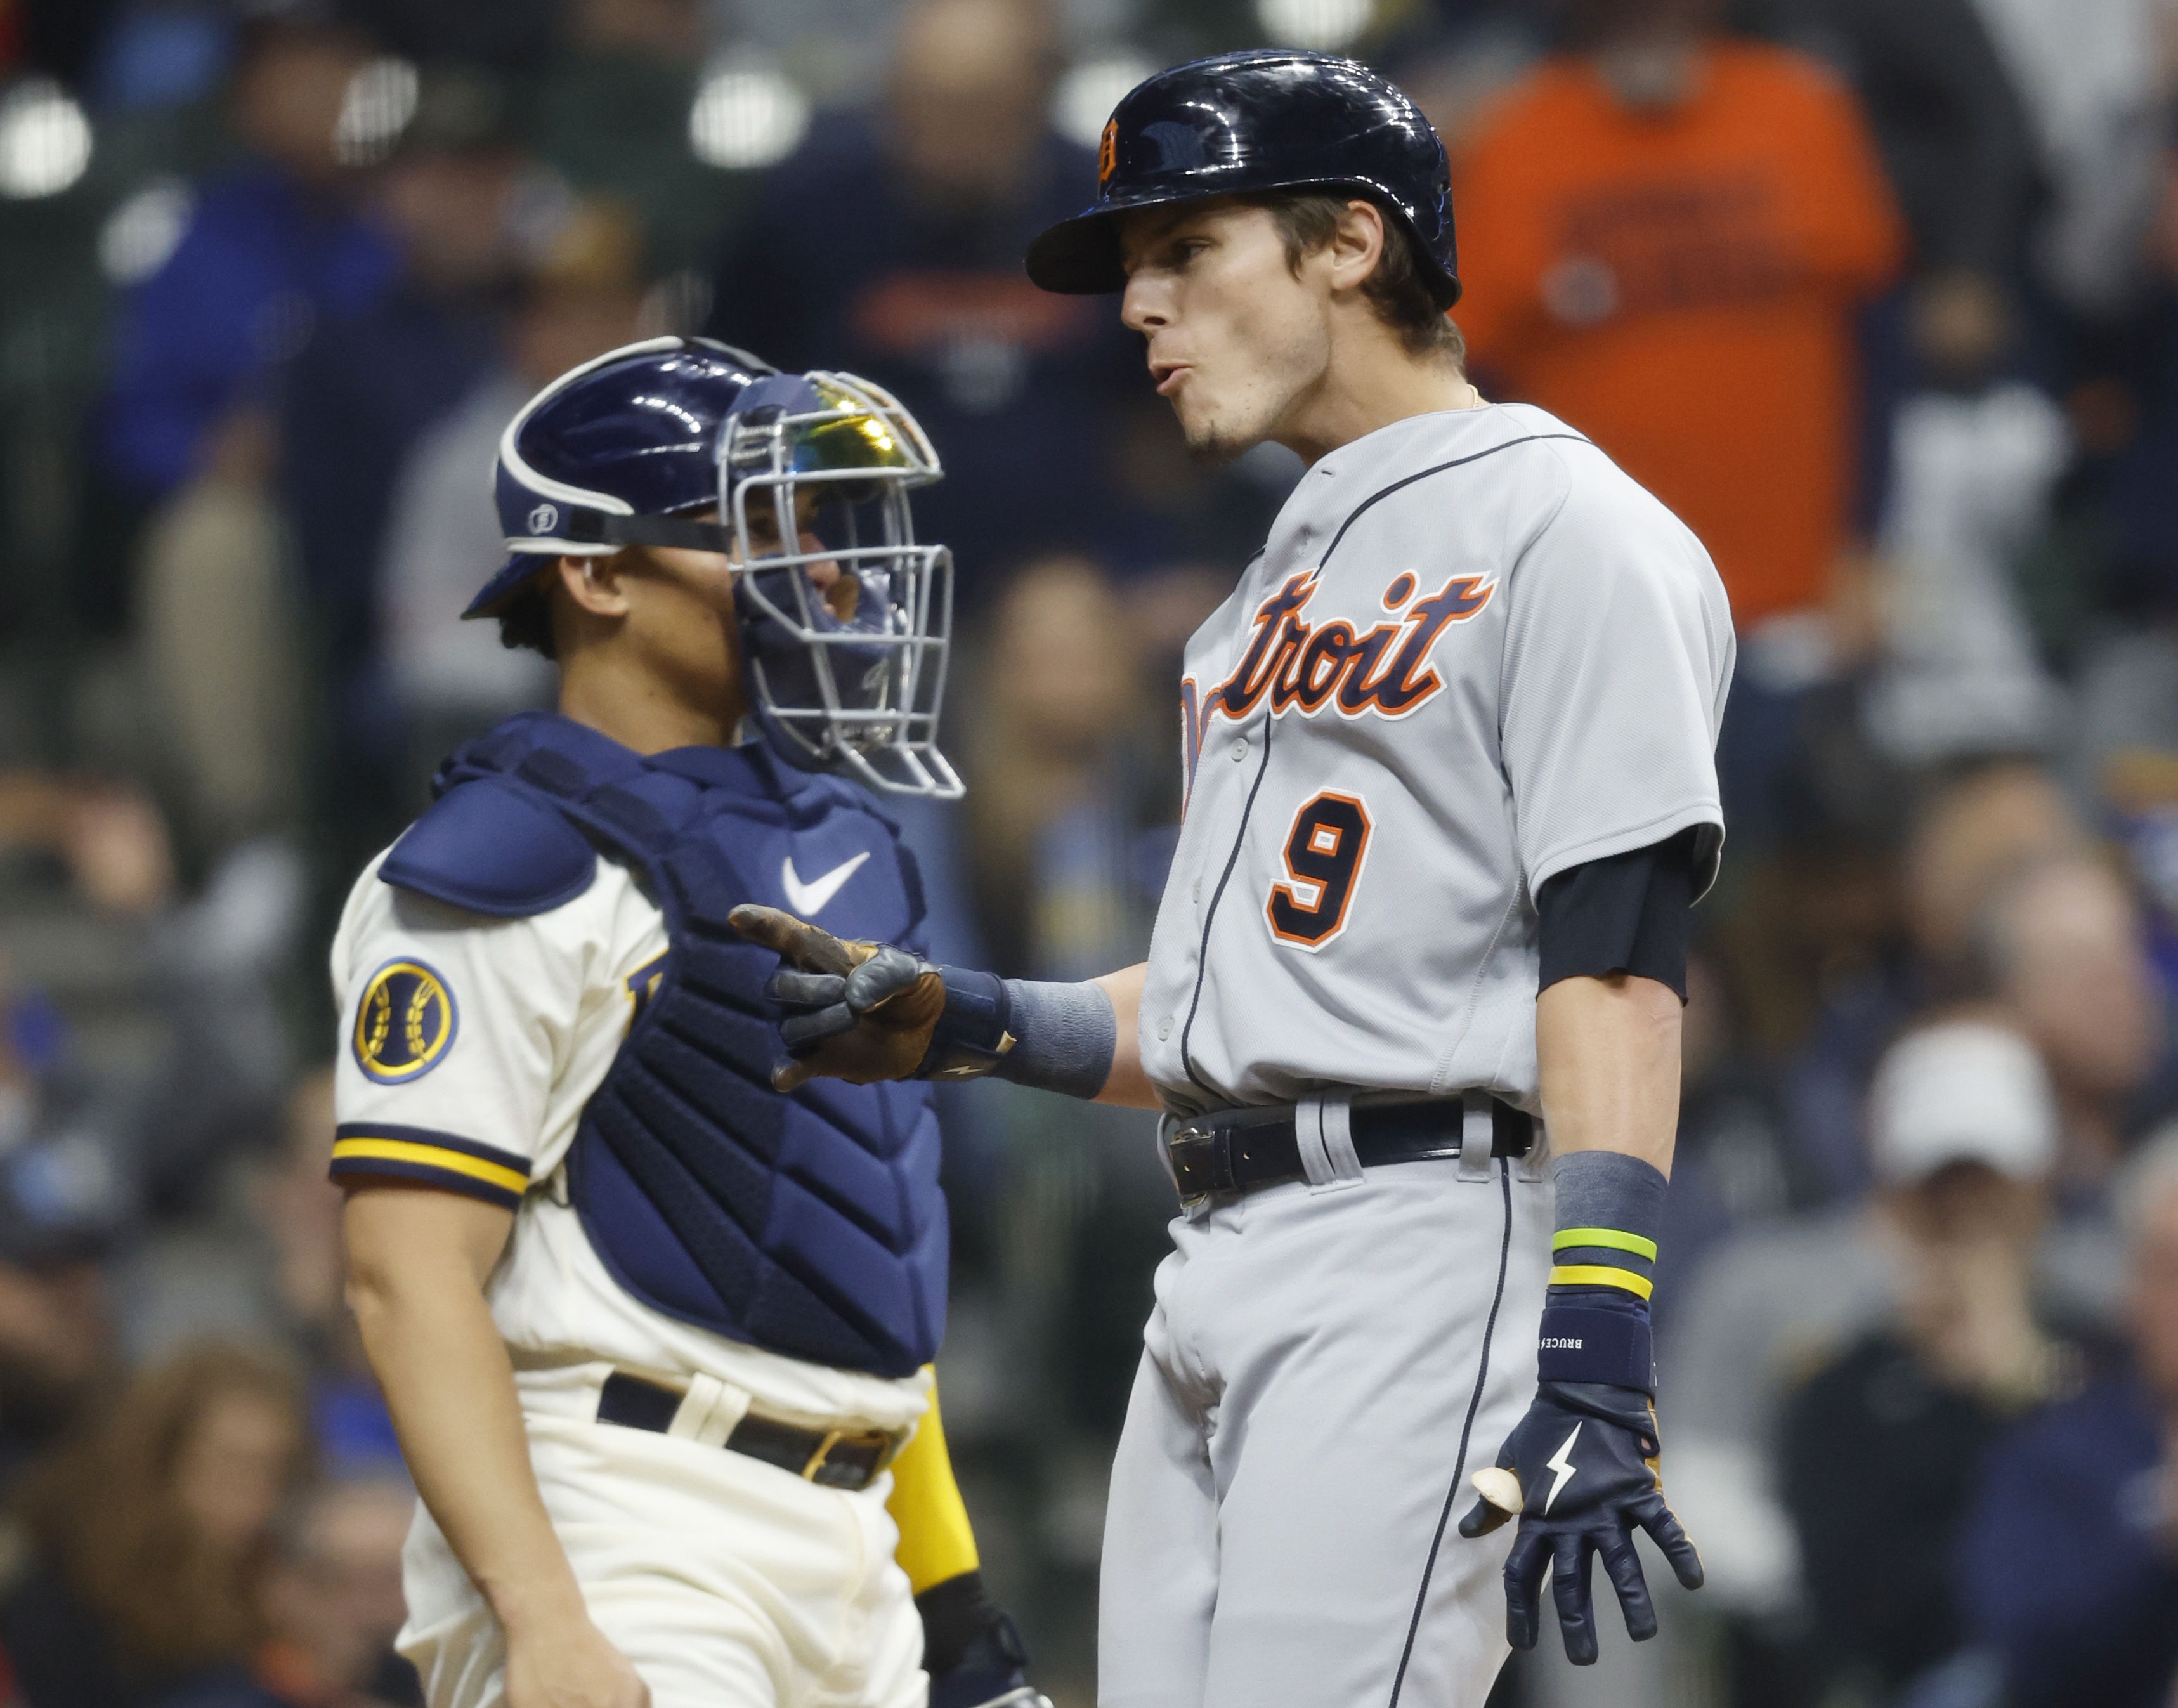 Nick Maton snaps out of slump, powers Tigers to victory 